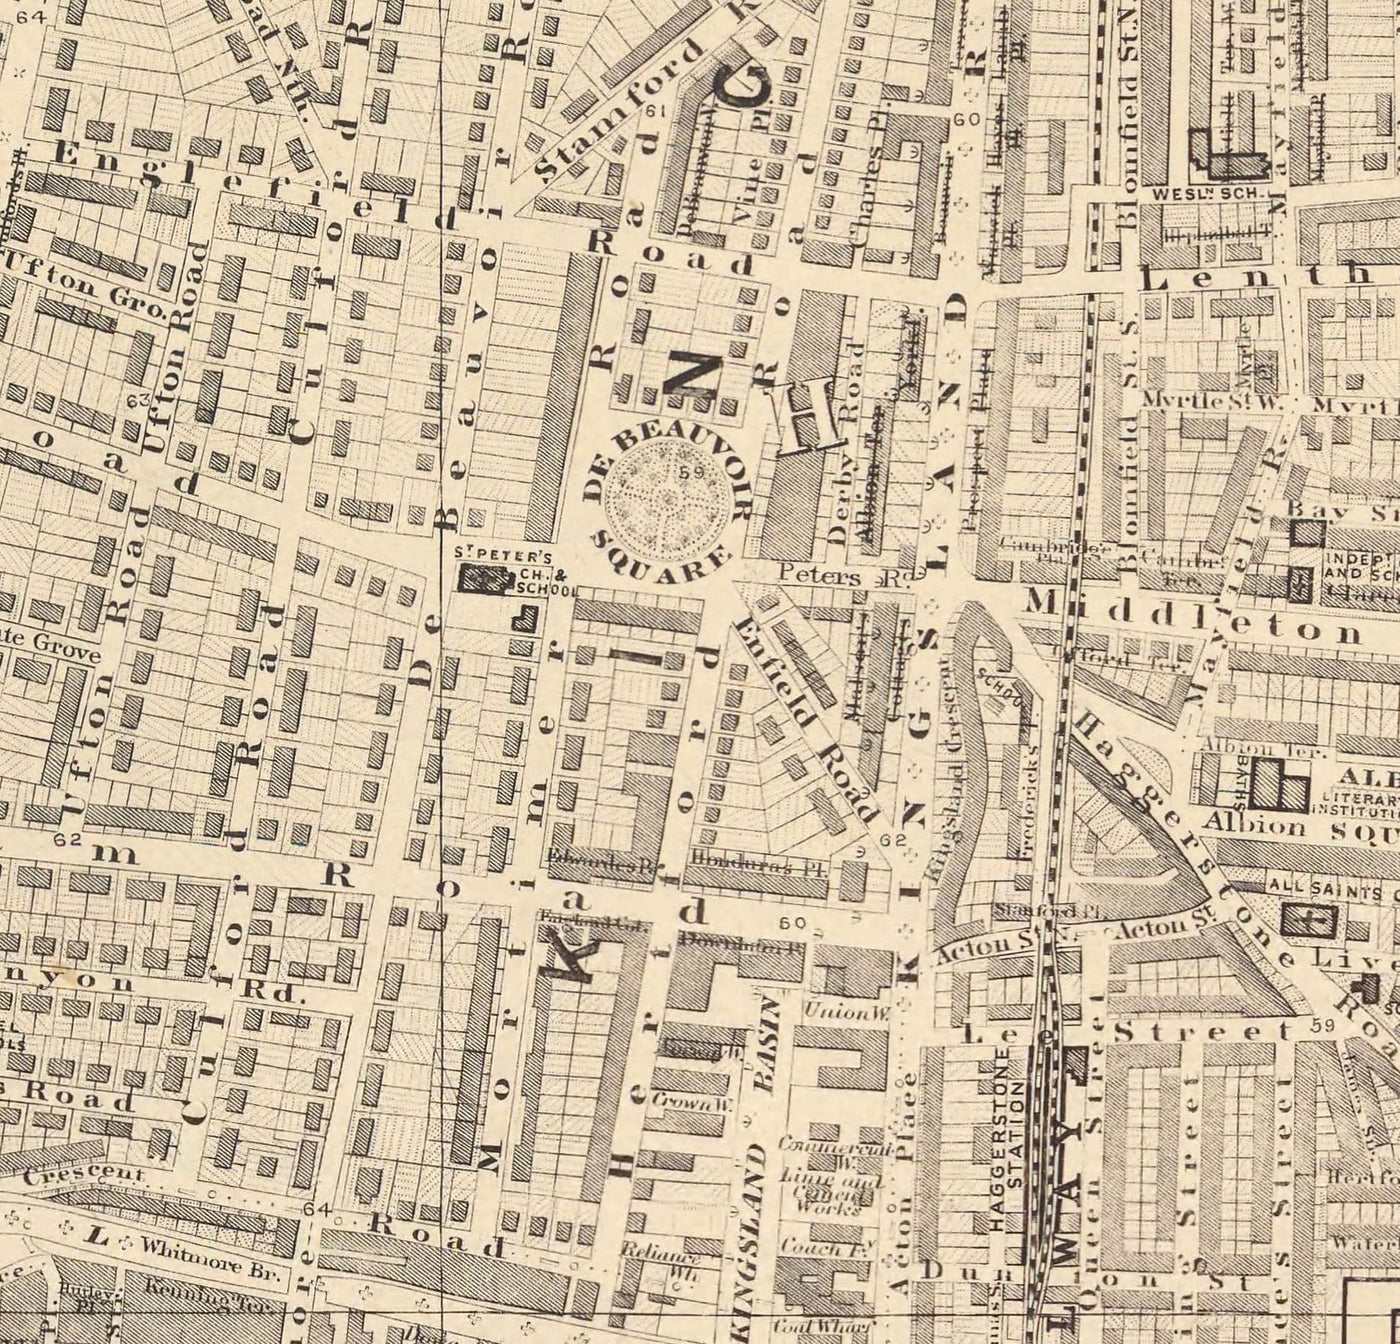 Old Map of London in 1862 by Edward Stanford - Hoxton, Haggerston, Dalston, Hackney, Bethnal Green, Shoreditch - N1, N5, E8, E2, EC1